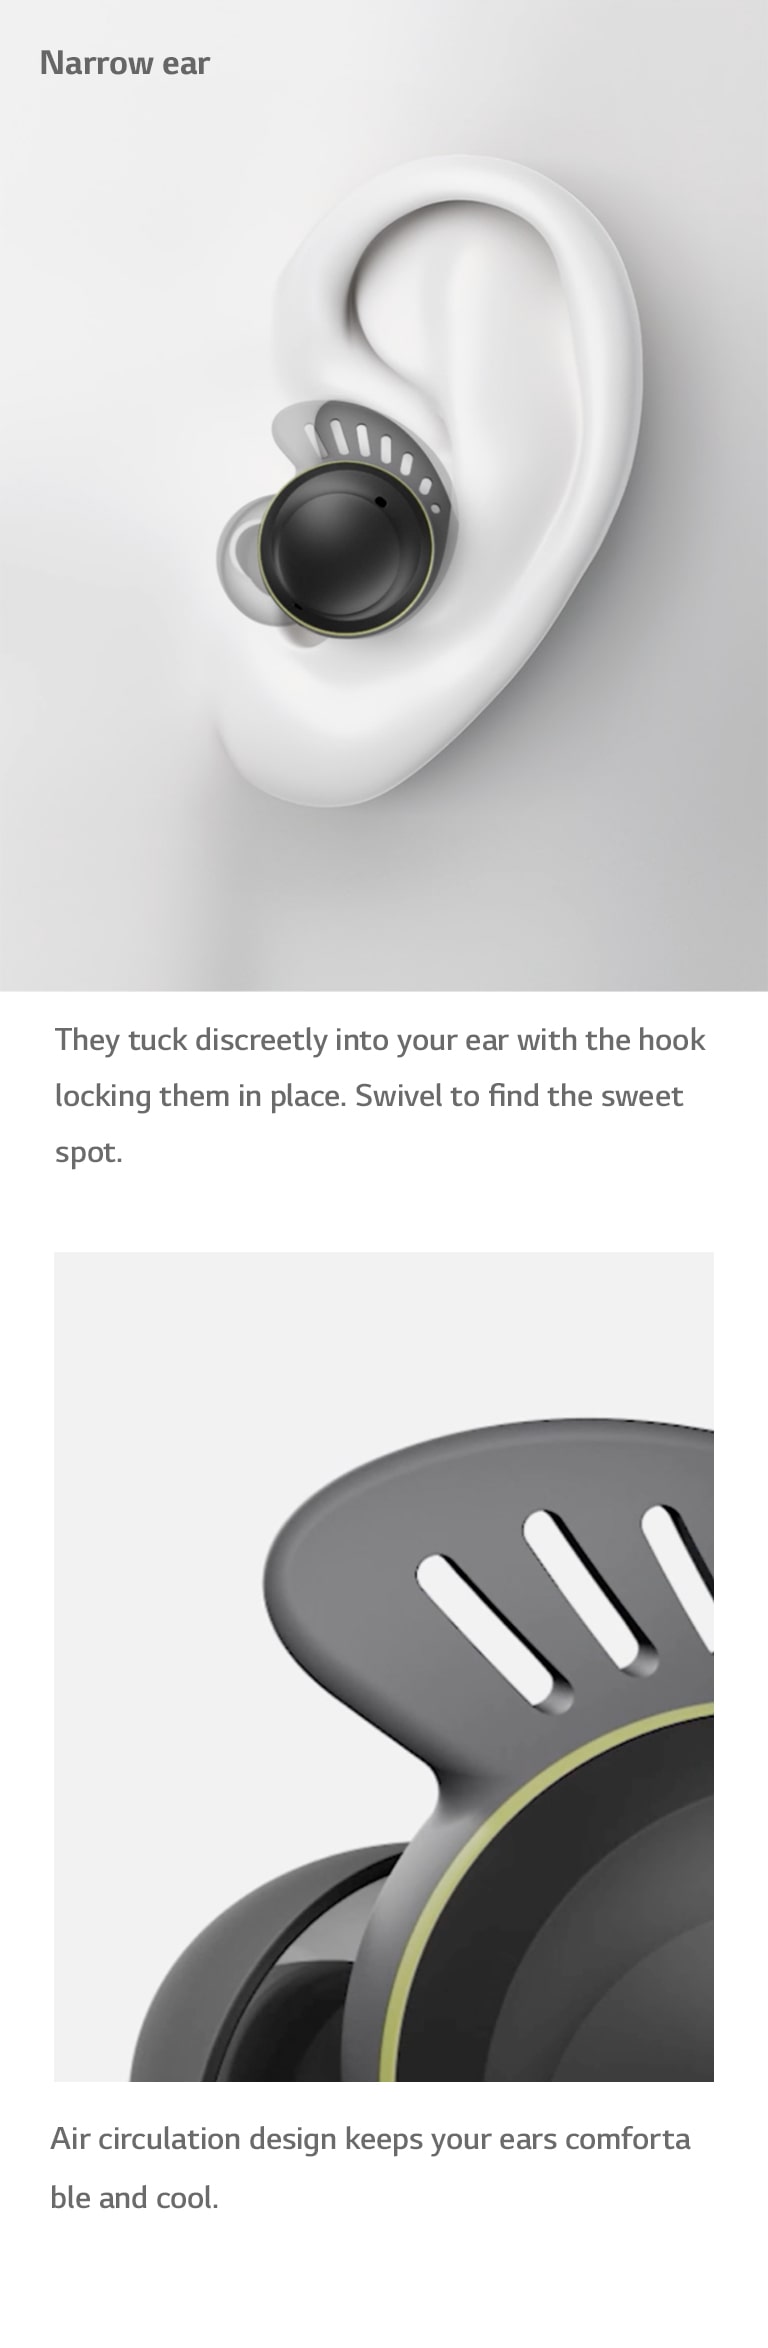 "In the video on the left, the earbuds are inserted into average, wide, and narrow ear shapes. The video on the right shows how air flows through the holes in the ear hook, for a pleasant, cooling feeling."